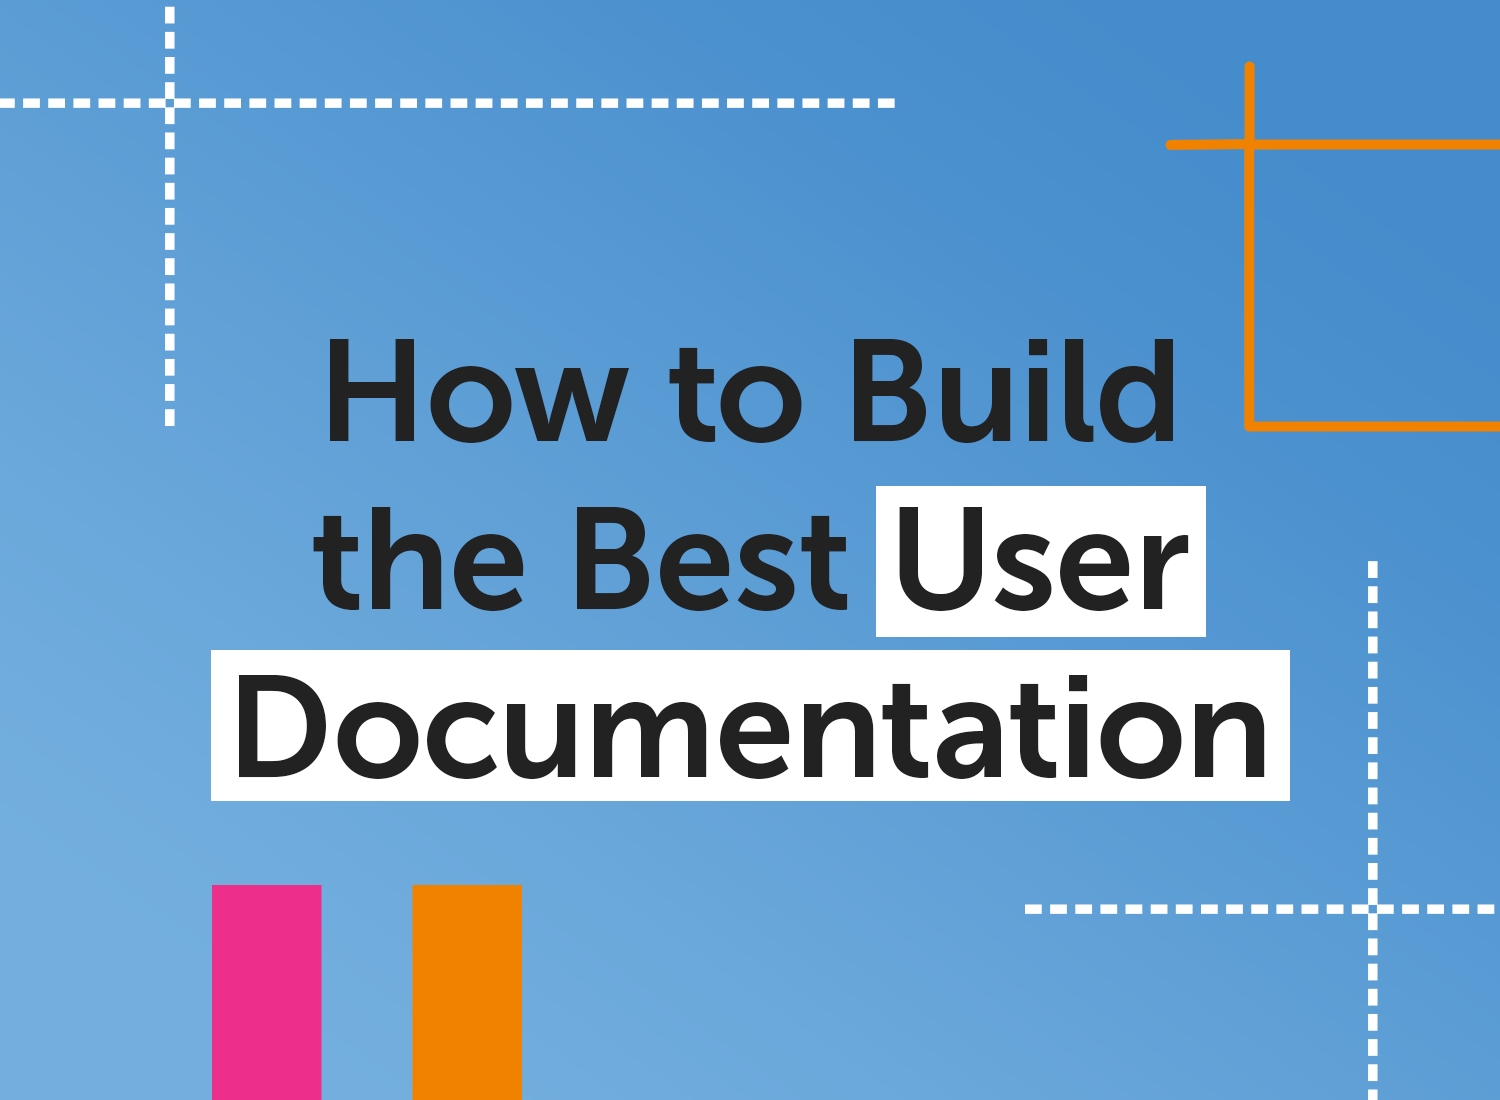 How to Build the Best User Documentation